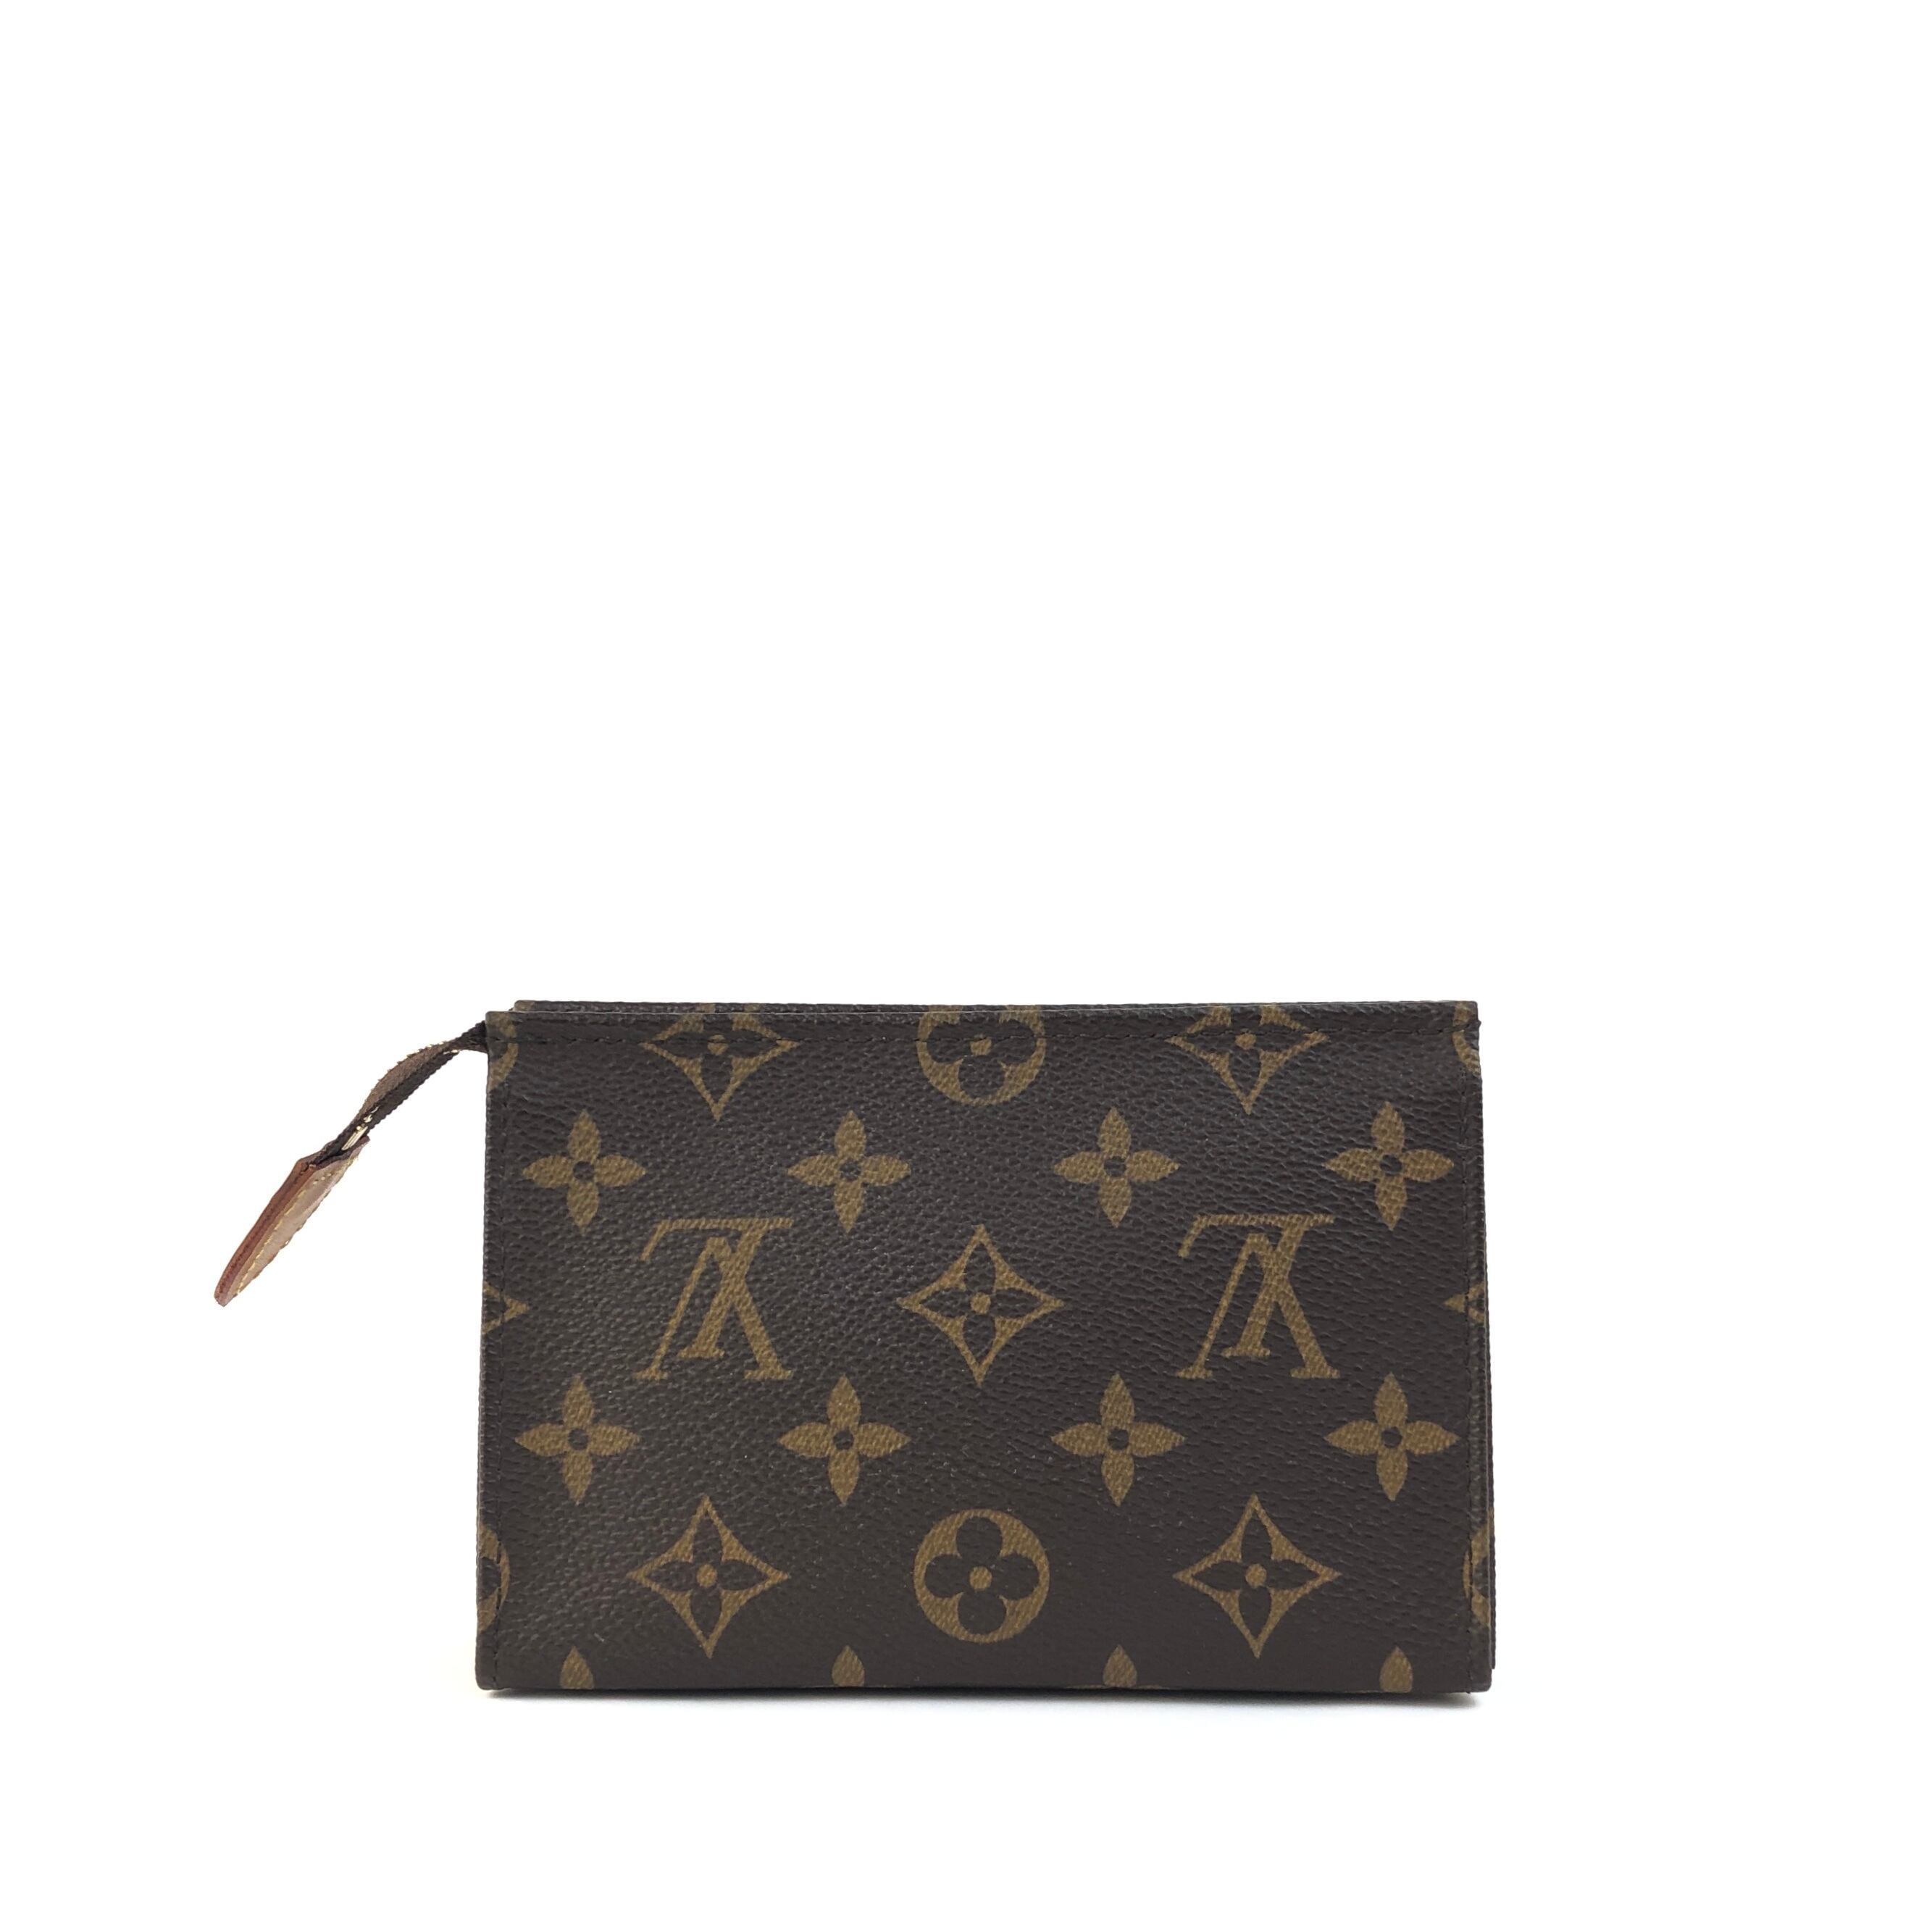 LOUIS VUITTON　ルイヴィトン　モノグラム　M47546　ポッシュトワレ15　クラッチバッグ　ポーチ　ブラウン　vintage　ヴィンテージ　 オールド　ブラウン　3jhxag | VintageShop solo powered by BASE